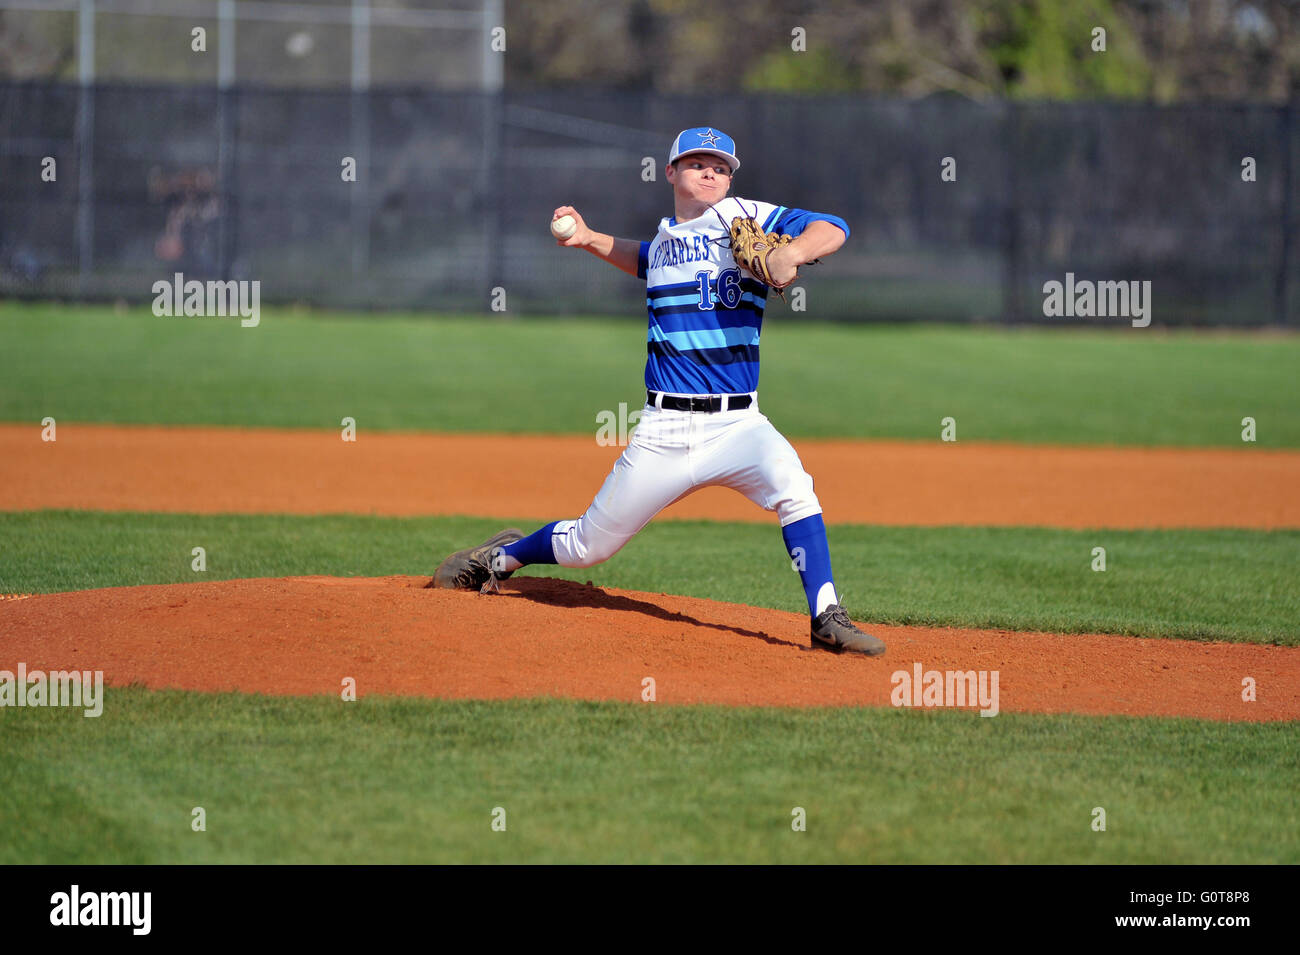 Right-handed pitcher delivering a pitch to a waiting hitter during a high school baseball game. Stock Photo